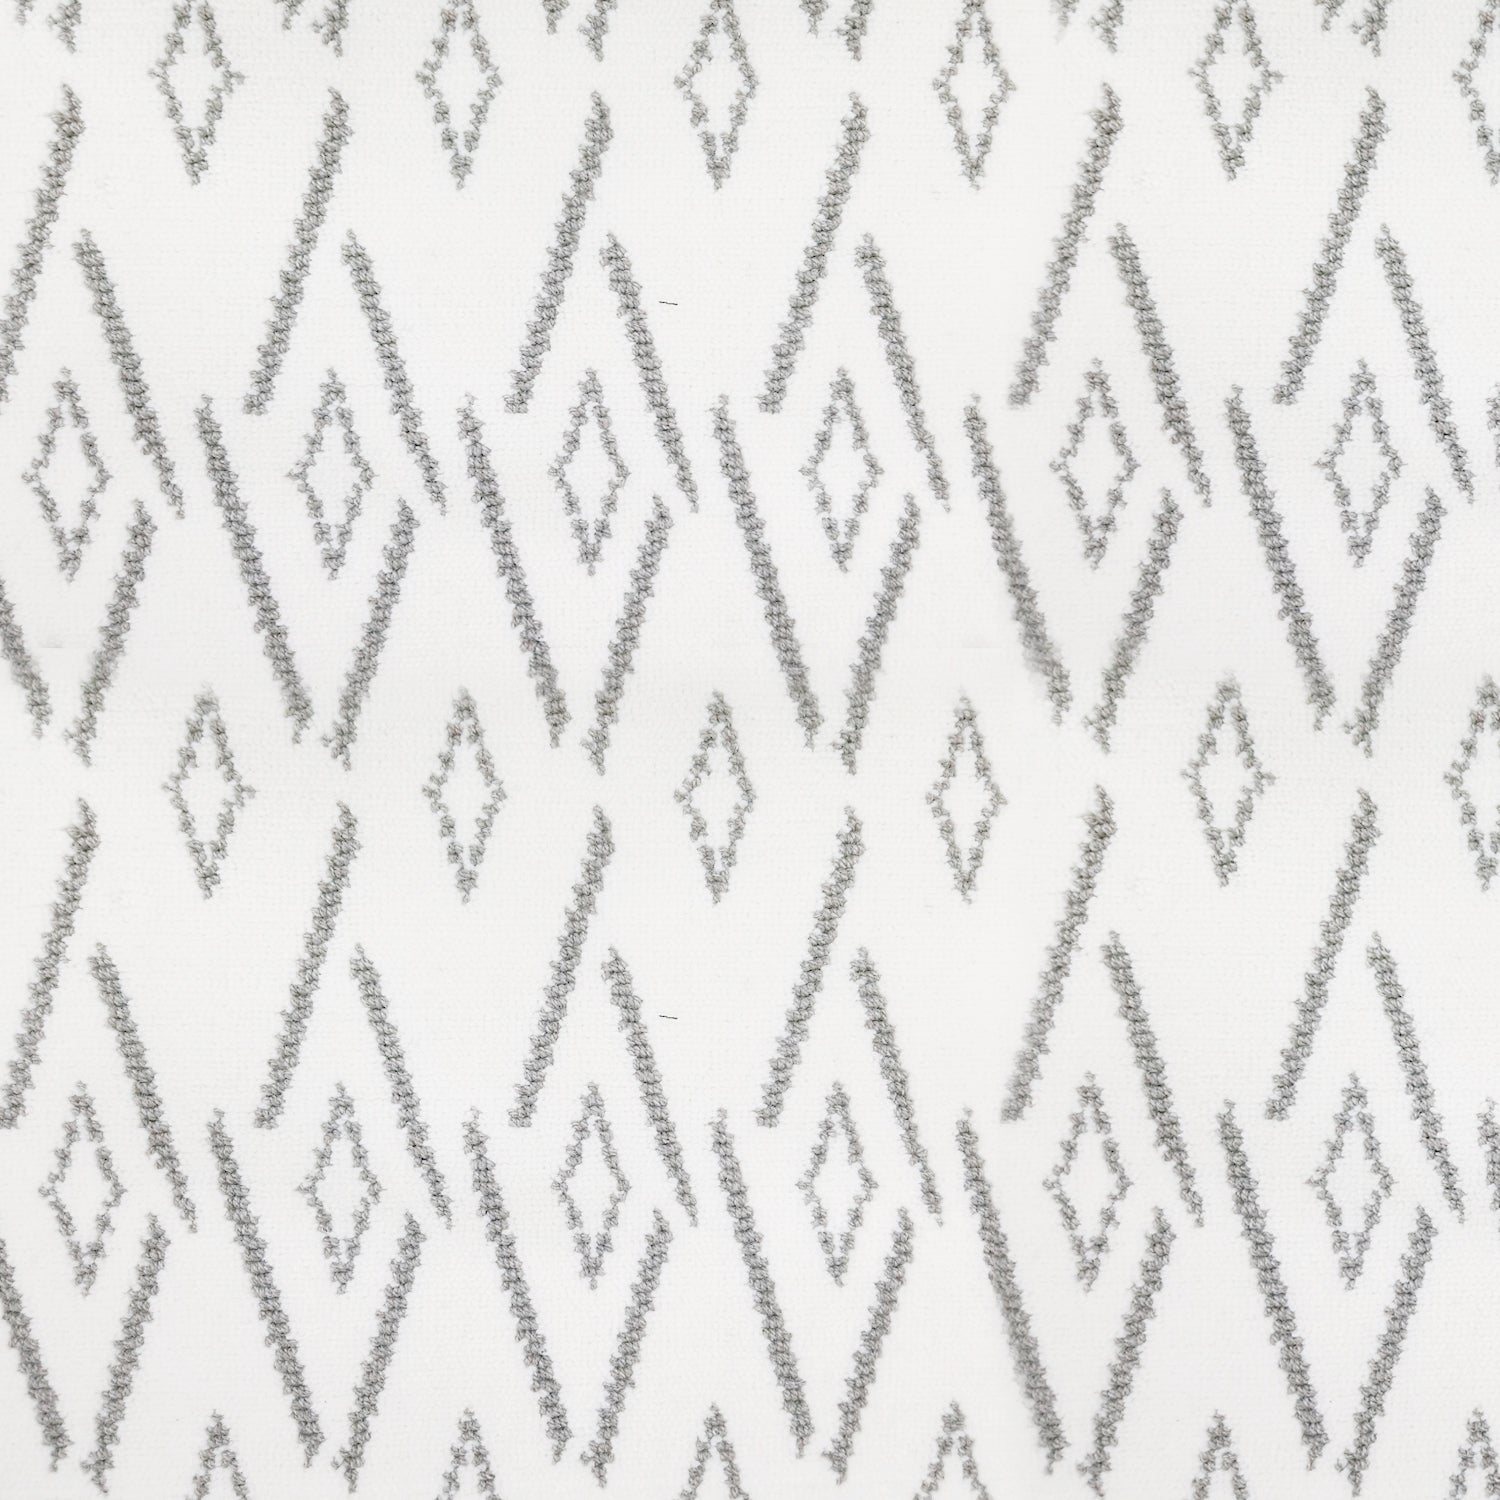 Woven broadloom carpet swatch in a repeating irregular diamond pattern in light gray on a white field.